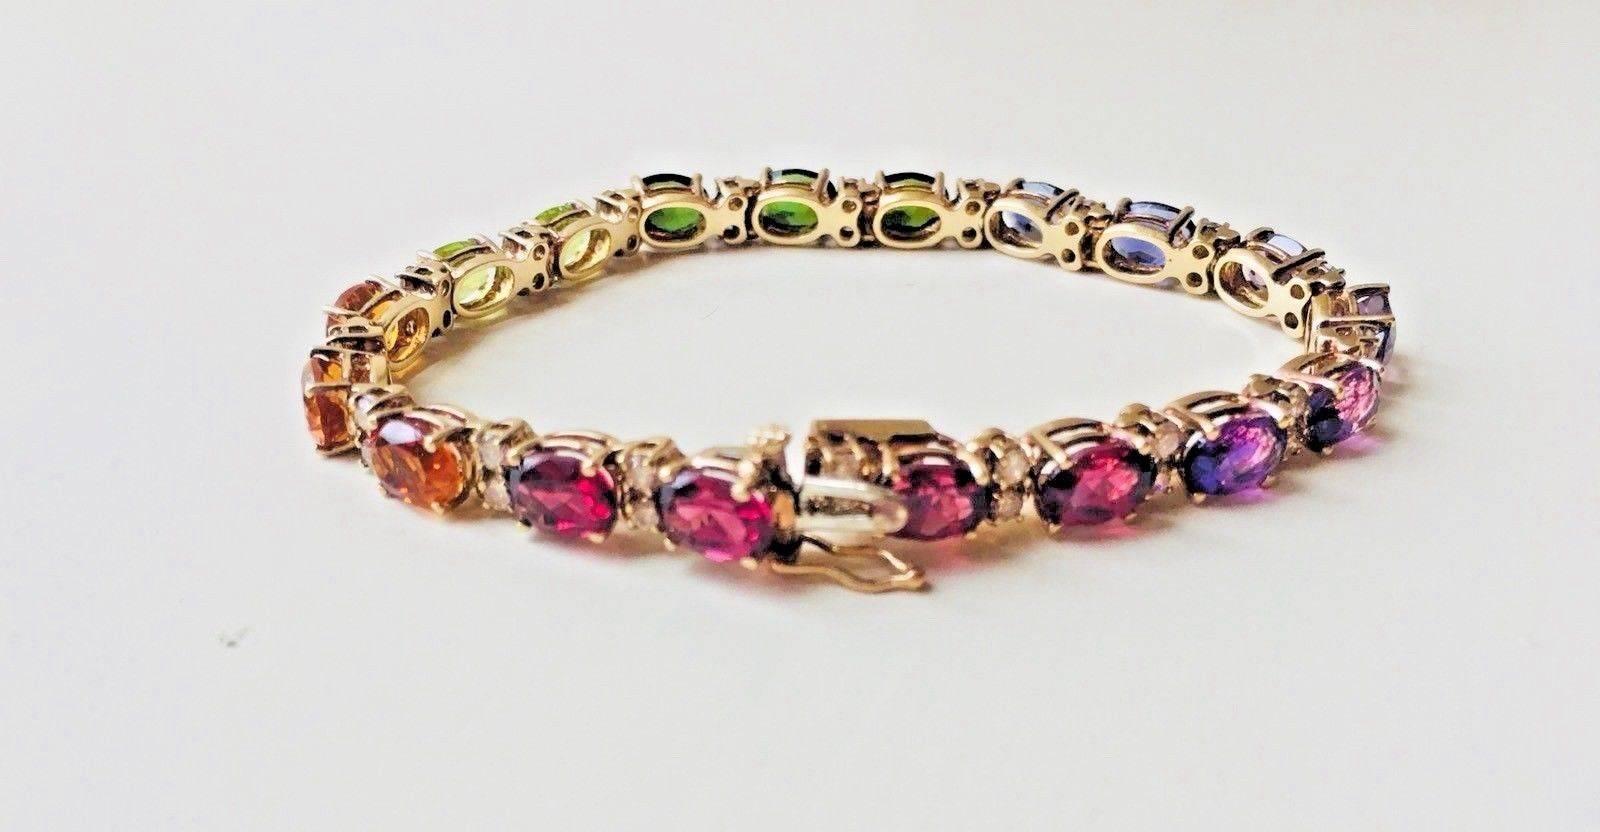 This beautiful gemstone bracelet features 1.45 carats of good quality white round brilliant diamonds, 3.40 carats of oval brilliant amethyst, 1.30 carats of oval brilliant iolite, 2.70 carats of oval modified brilliant green tourmaline, 1.90 carats